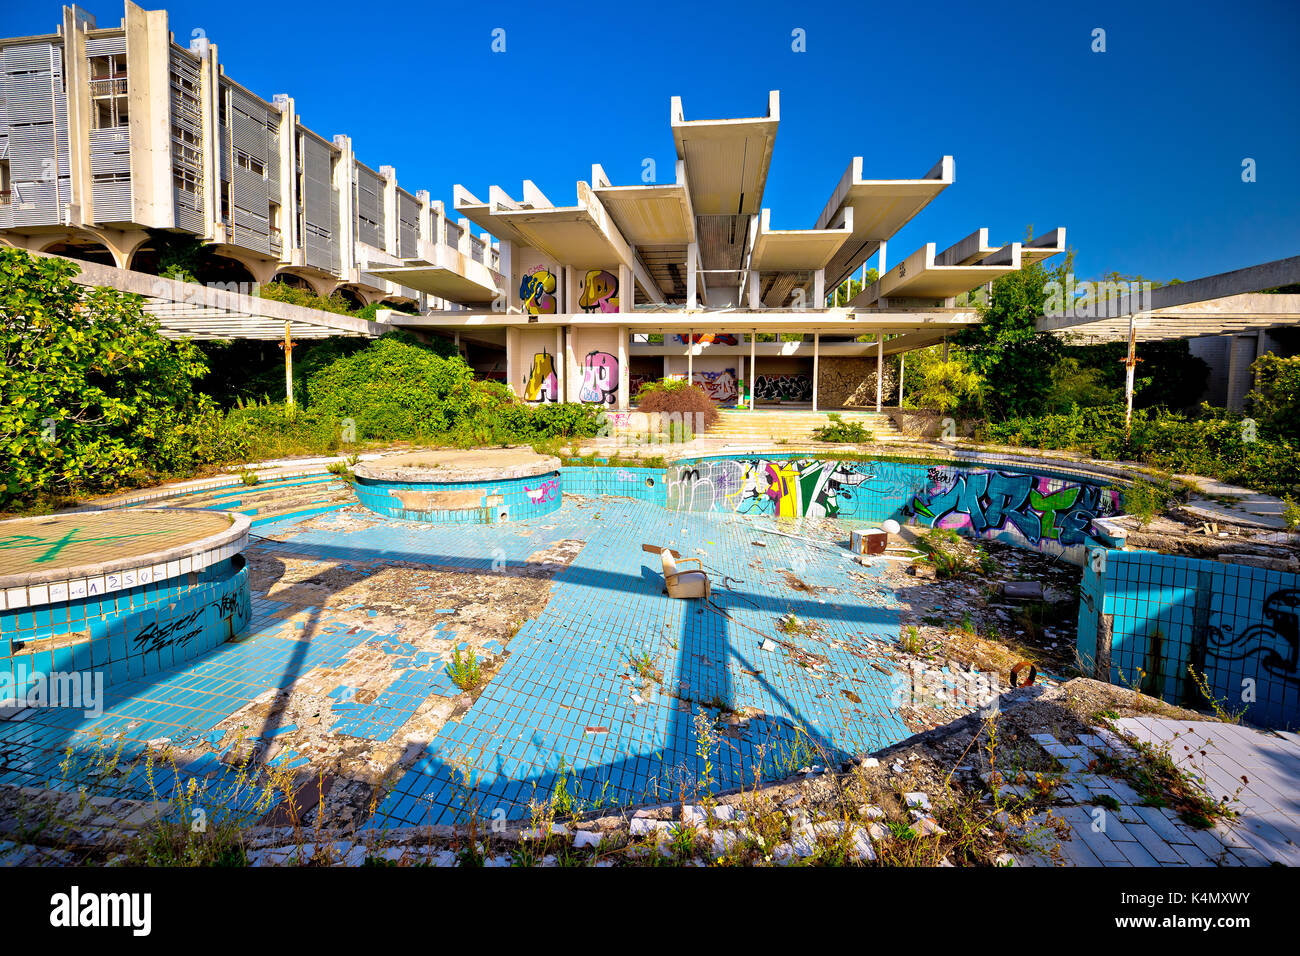 Krk, Croatia, August 31 2017: Abandoned and destructed luxury hotel Palace Haludovo in Malinska, Island of Krk, Croatia. In 1970's and 1980's it was t Stock Photo